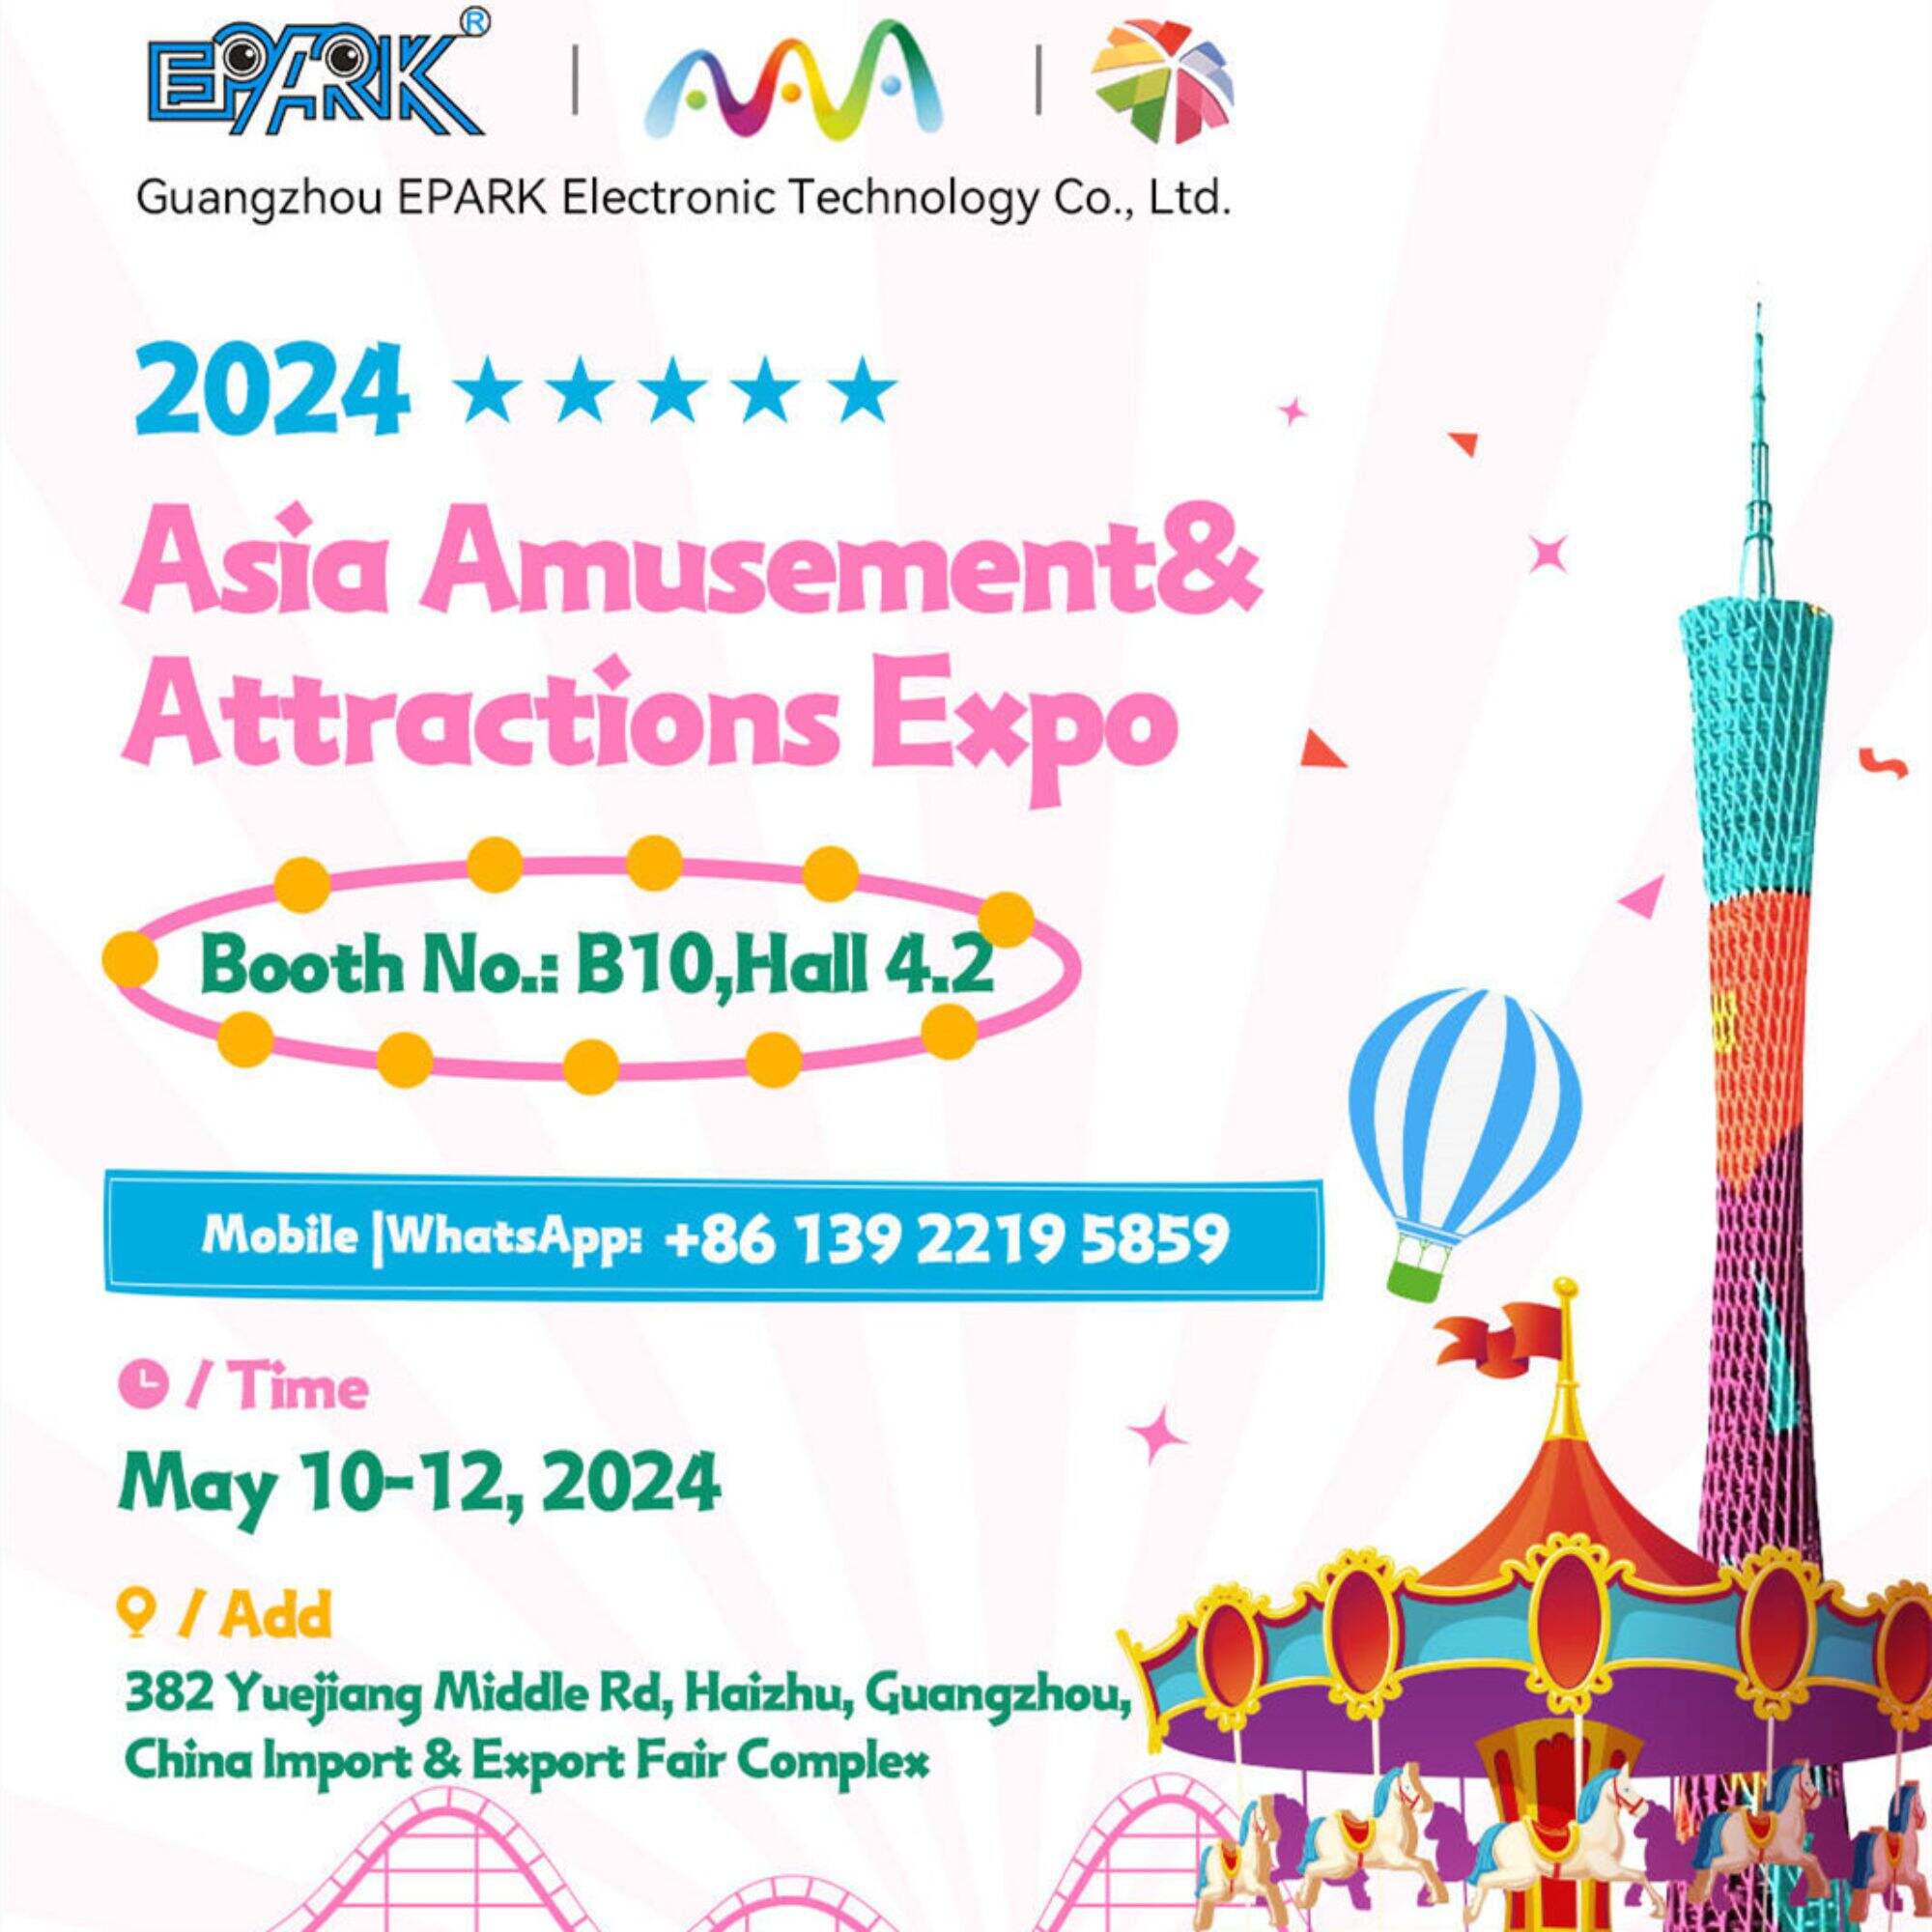 Meet EPARK At Asia Amusement & Attractions Expo